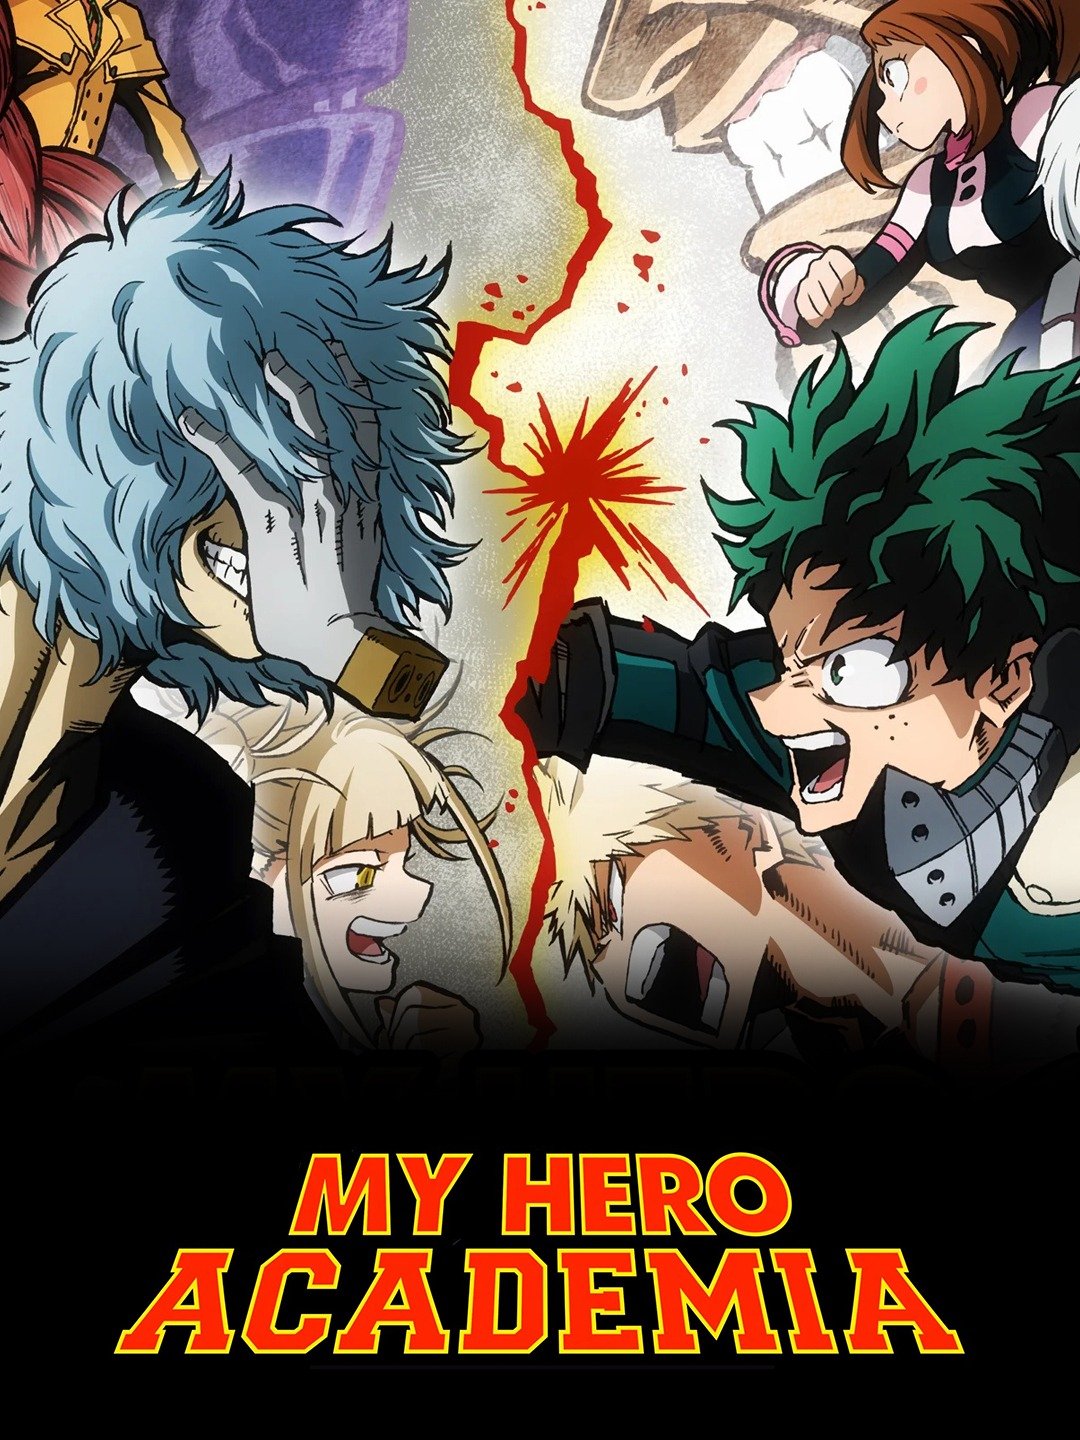 Do you think Deku (My Hero Academia) is a boring main character, why or why  not? I've heard quite a few people bring this up recently. - Quora